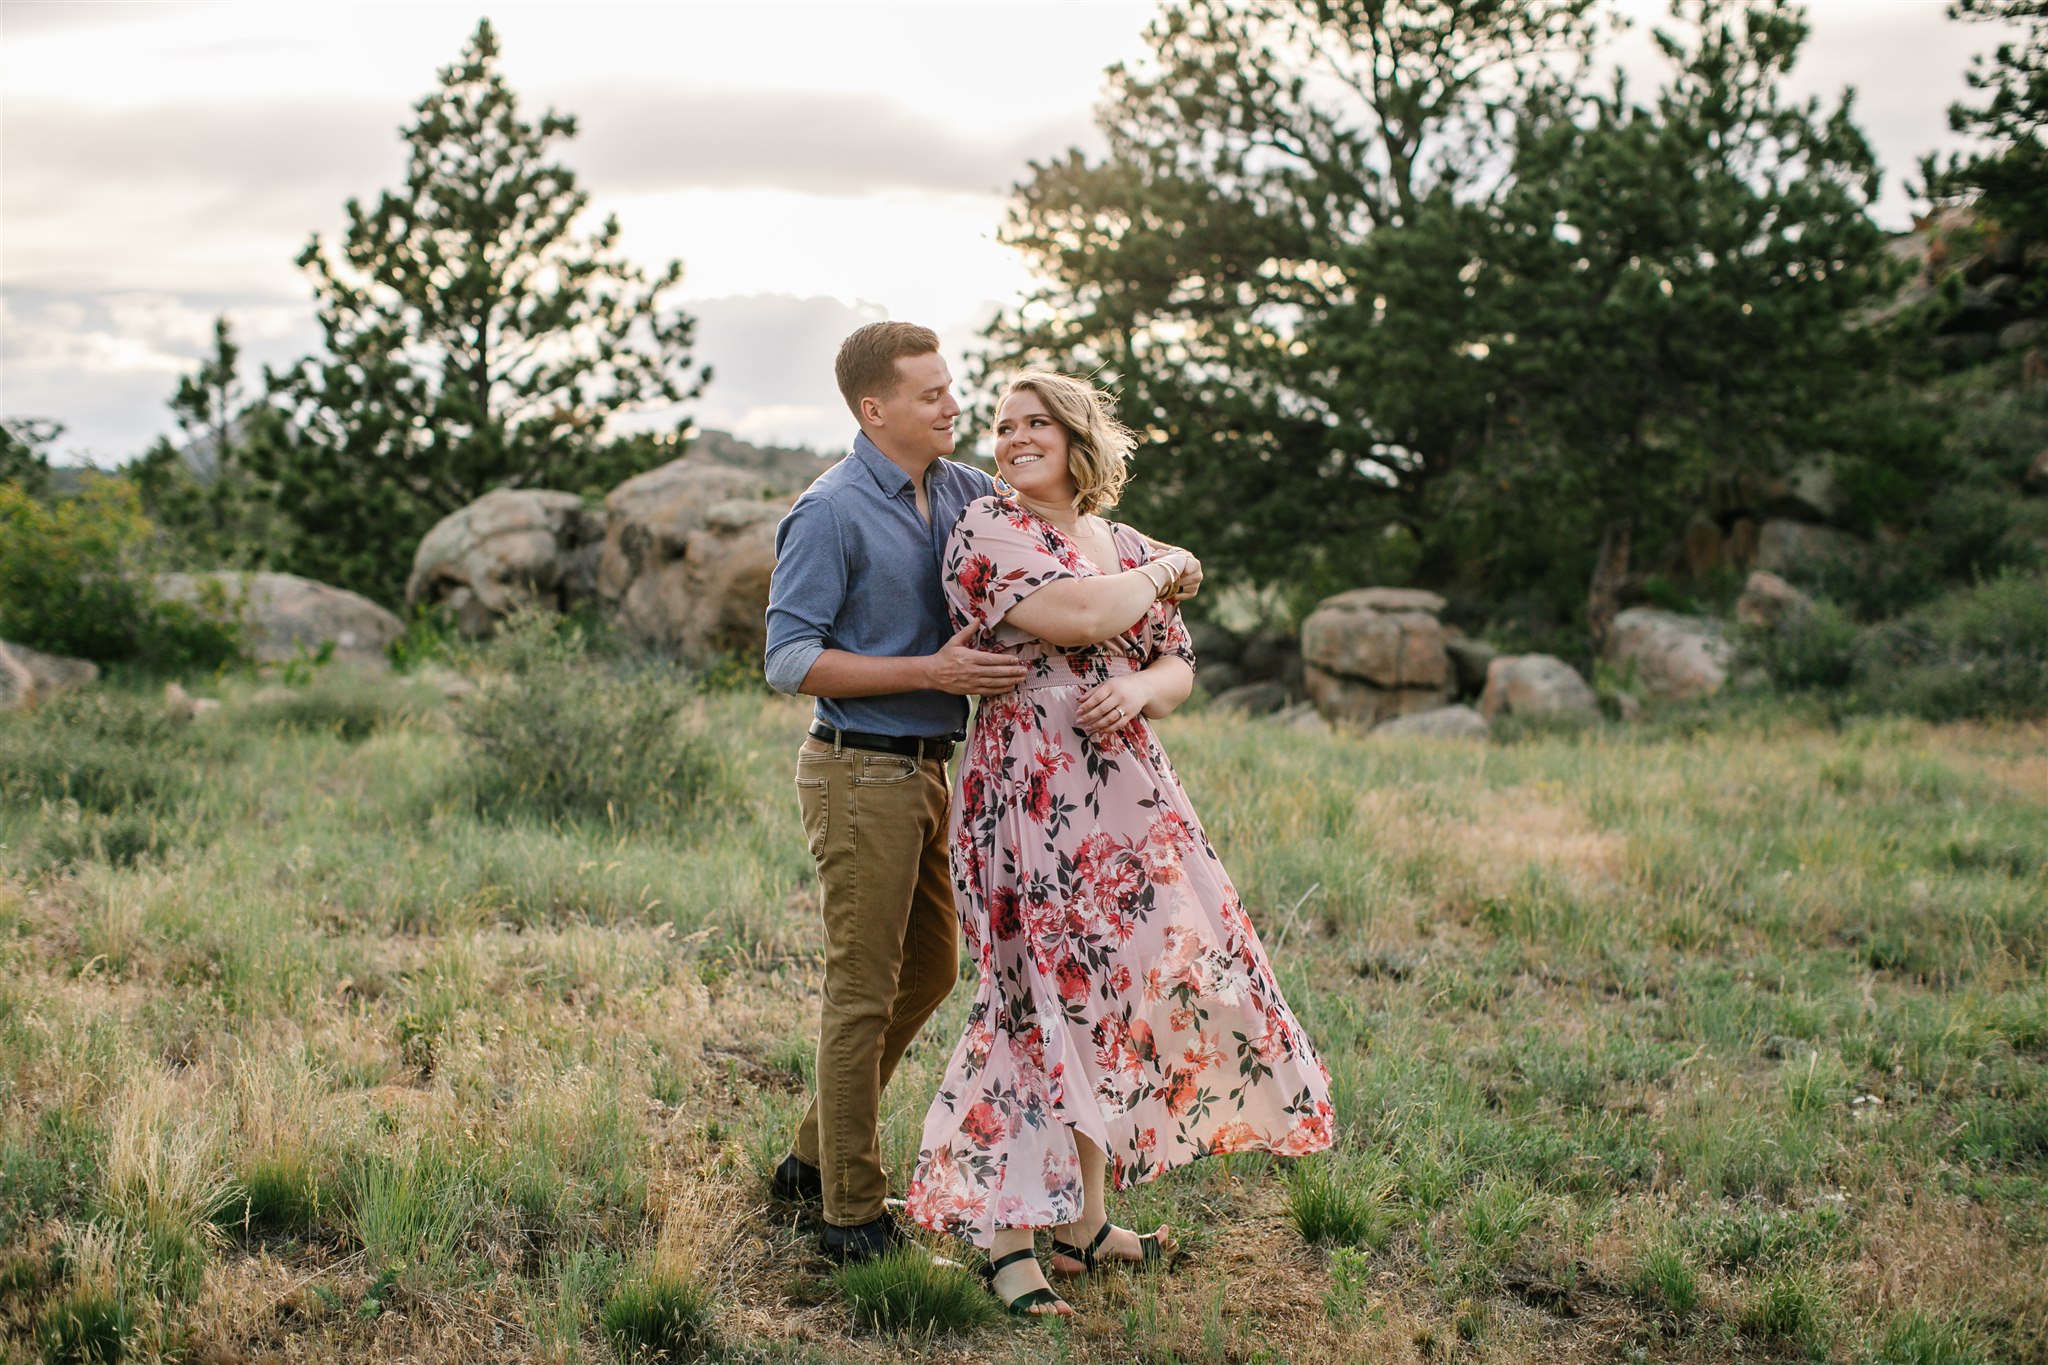 Summer engagement session color choices